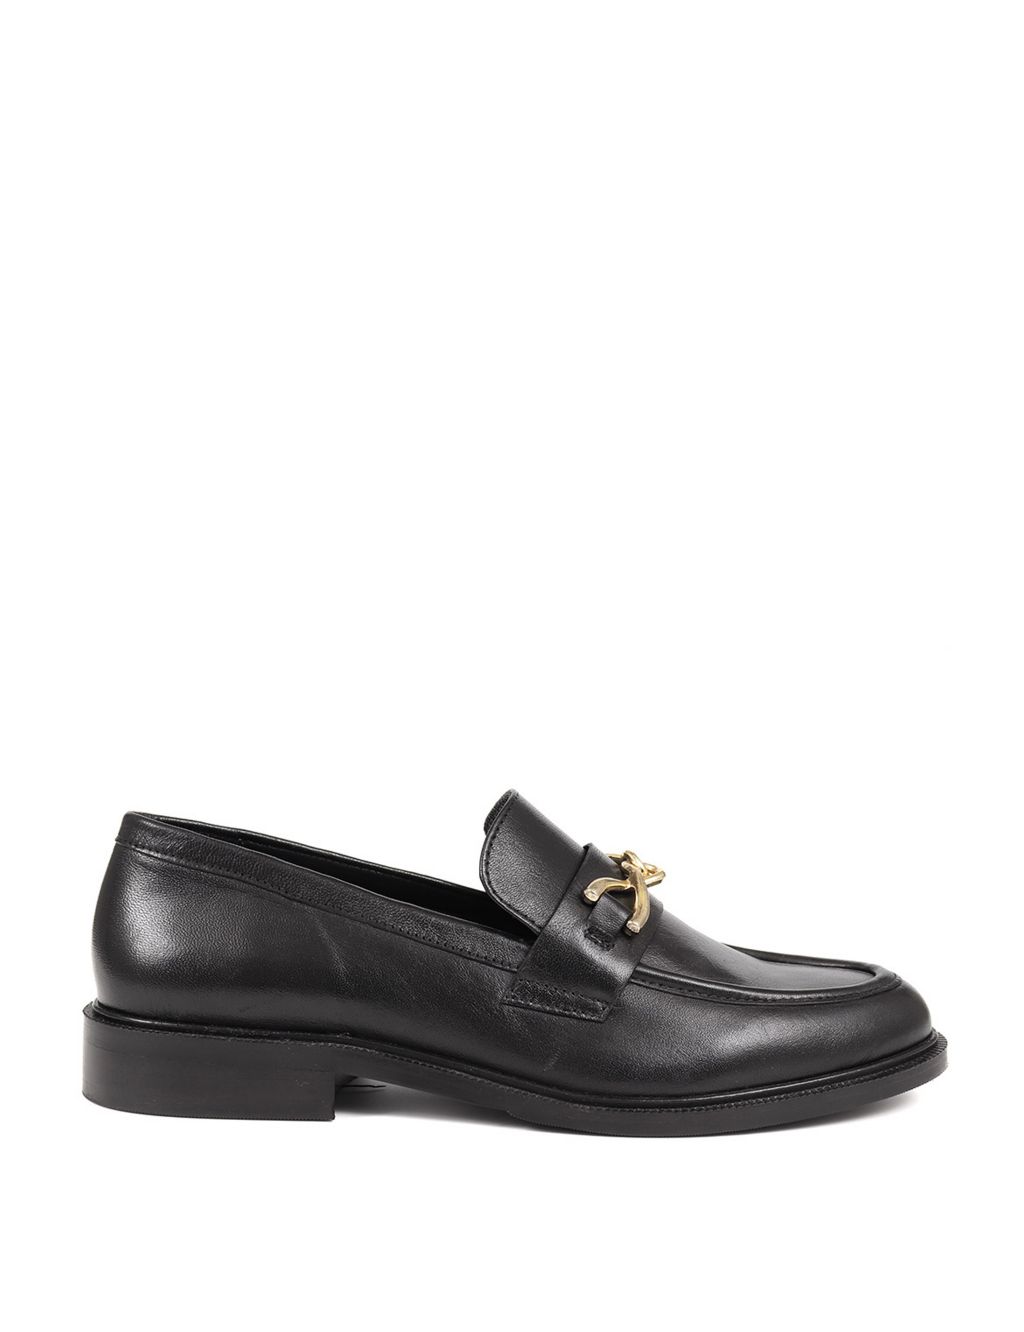 Leather Chain Detail Flat Loafers | Jones Bootmaker | M&S